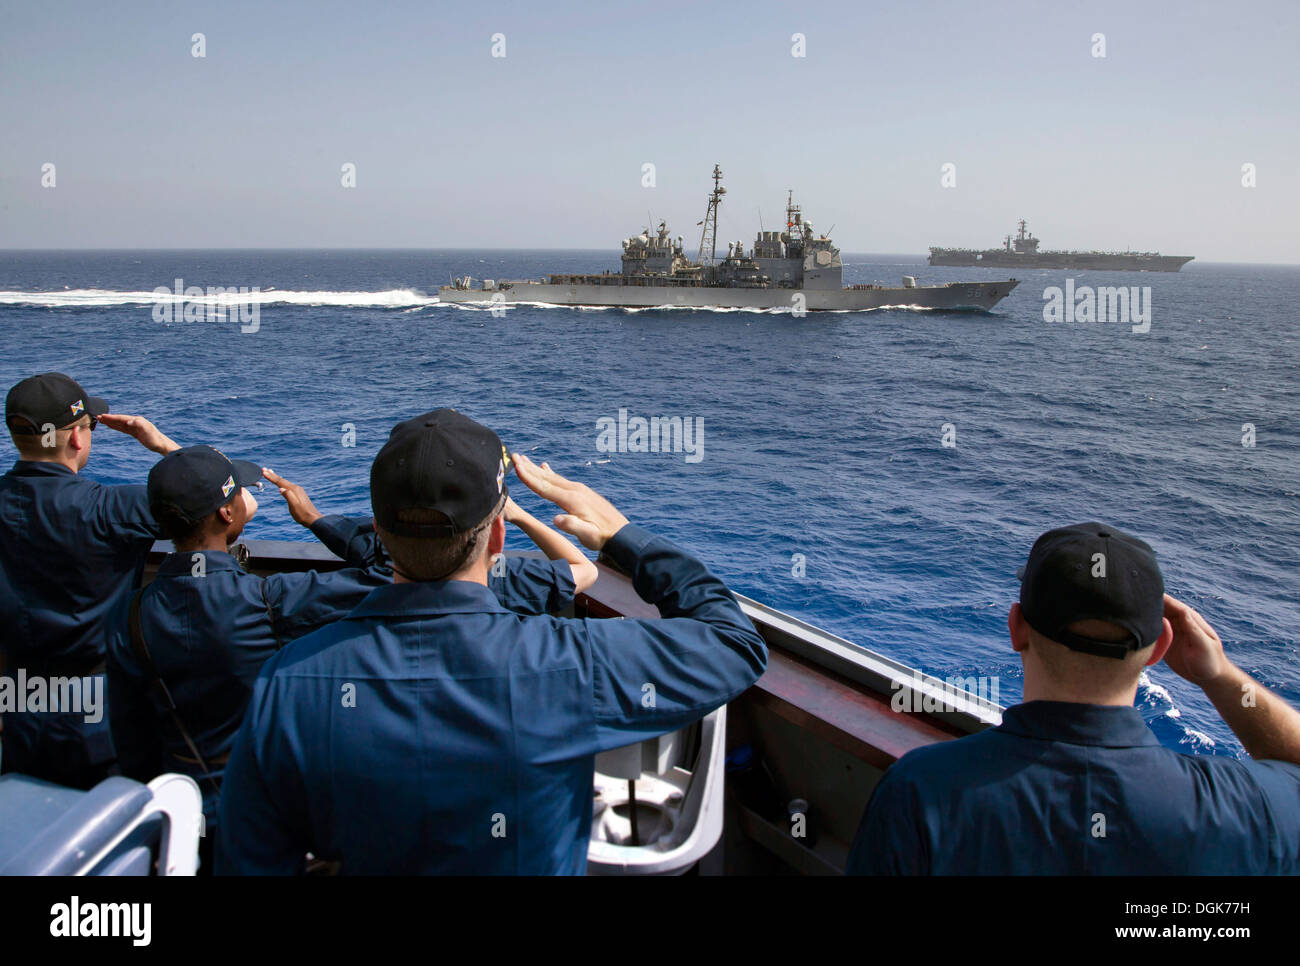 Cmdr. Wilson Marks, commanding officer of the guided-missile destroyer USS Mason (DDG 87), bottom center, renders passing honors to the guided-missile cruiser USS San Jacinto (CG 56). The aircraft carrier USS Nimitz (CVN 68), top right, guards the formati Stock Photo